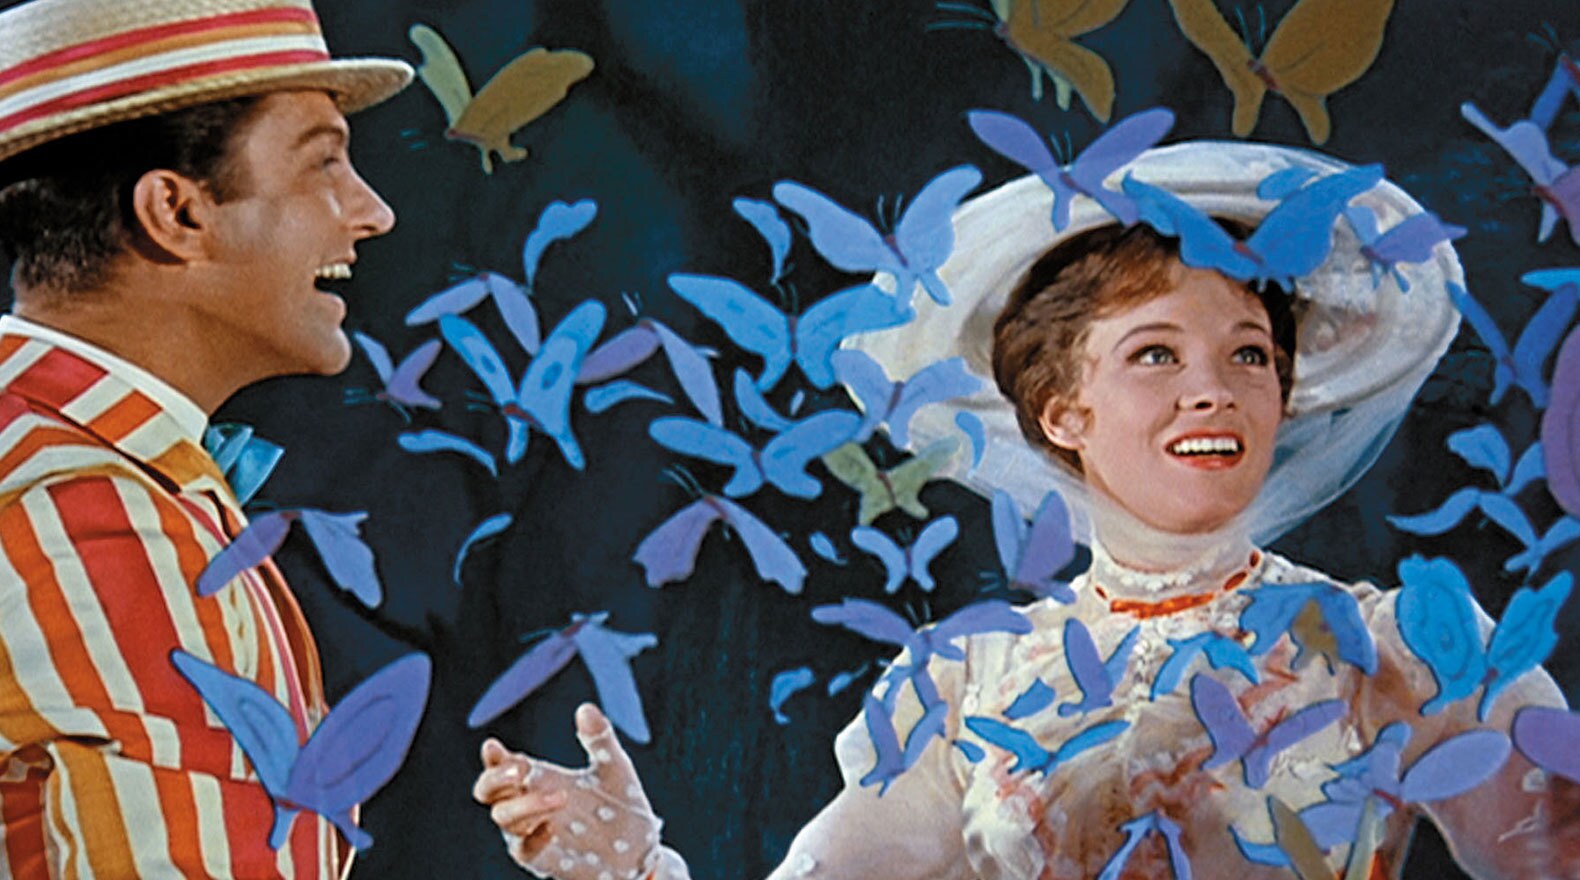 The film "Mary Poppins" was filmed entirely at the Walt Disney Studios